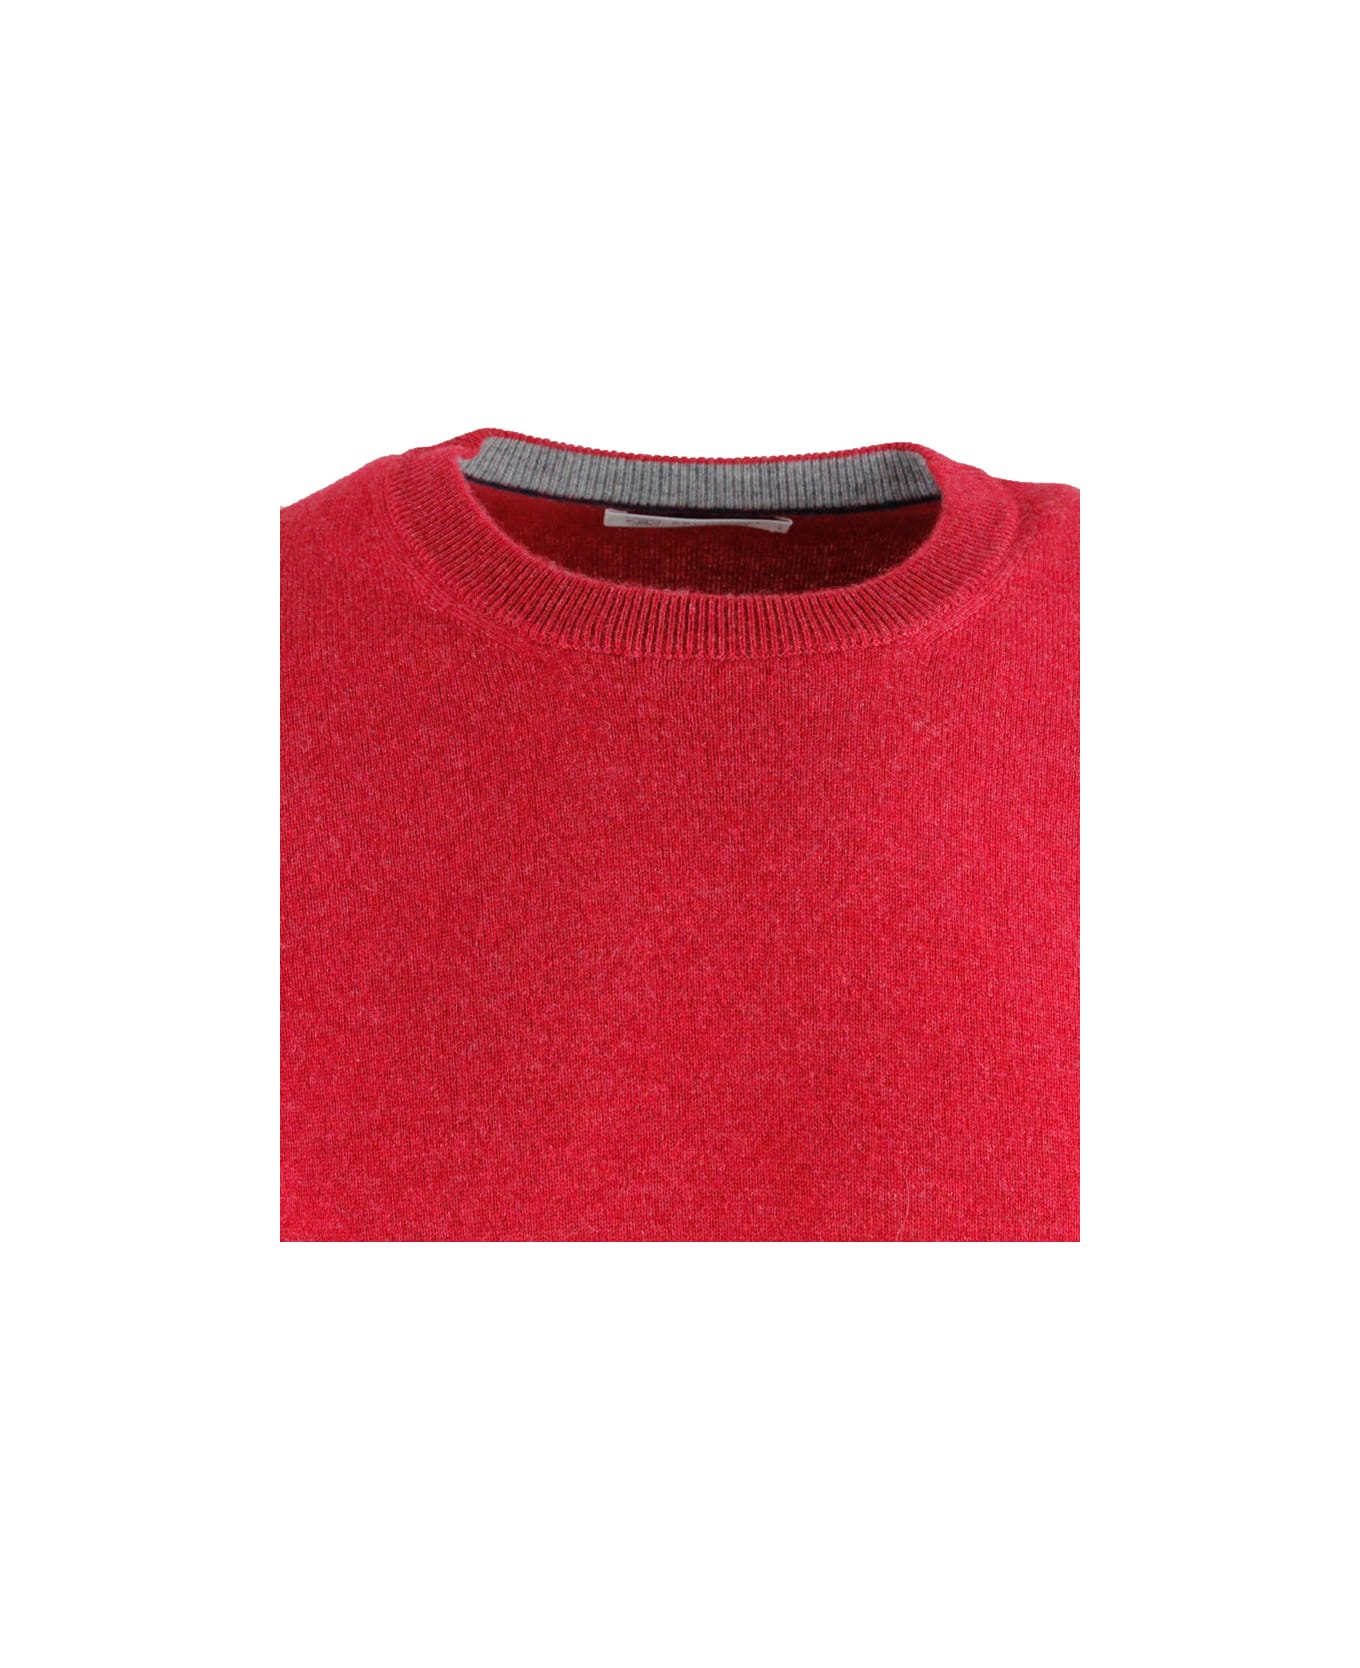 Brunello Cucinelli Cashmere Crewneck Sweater With Contrasting Profile - Red ニットウェア